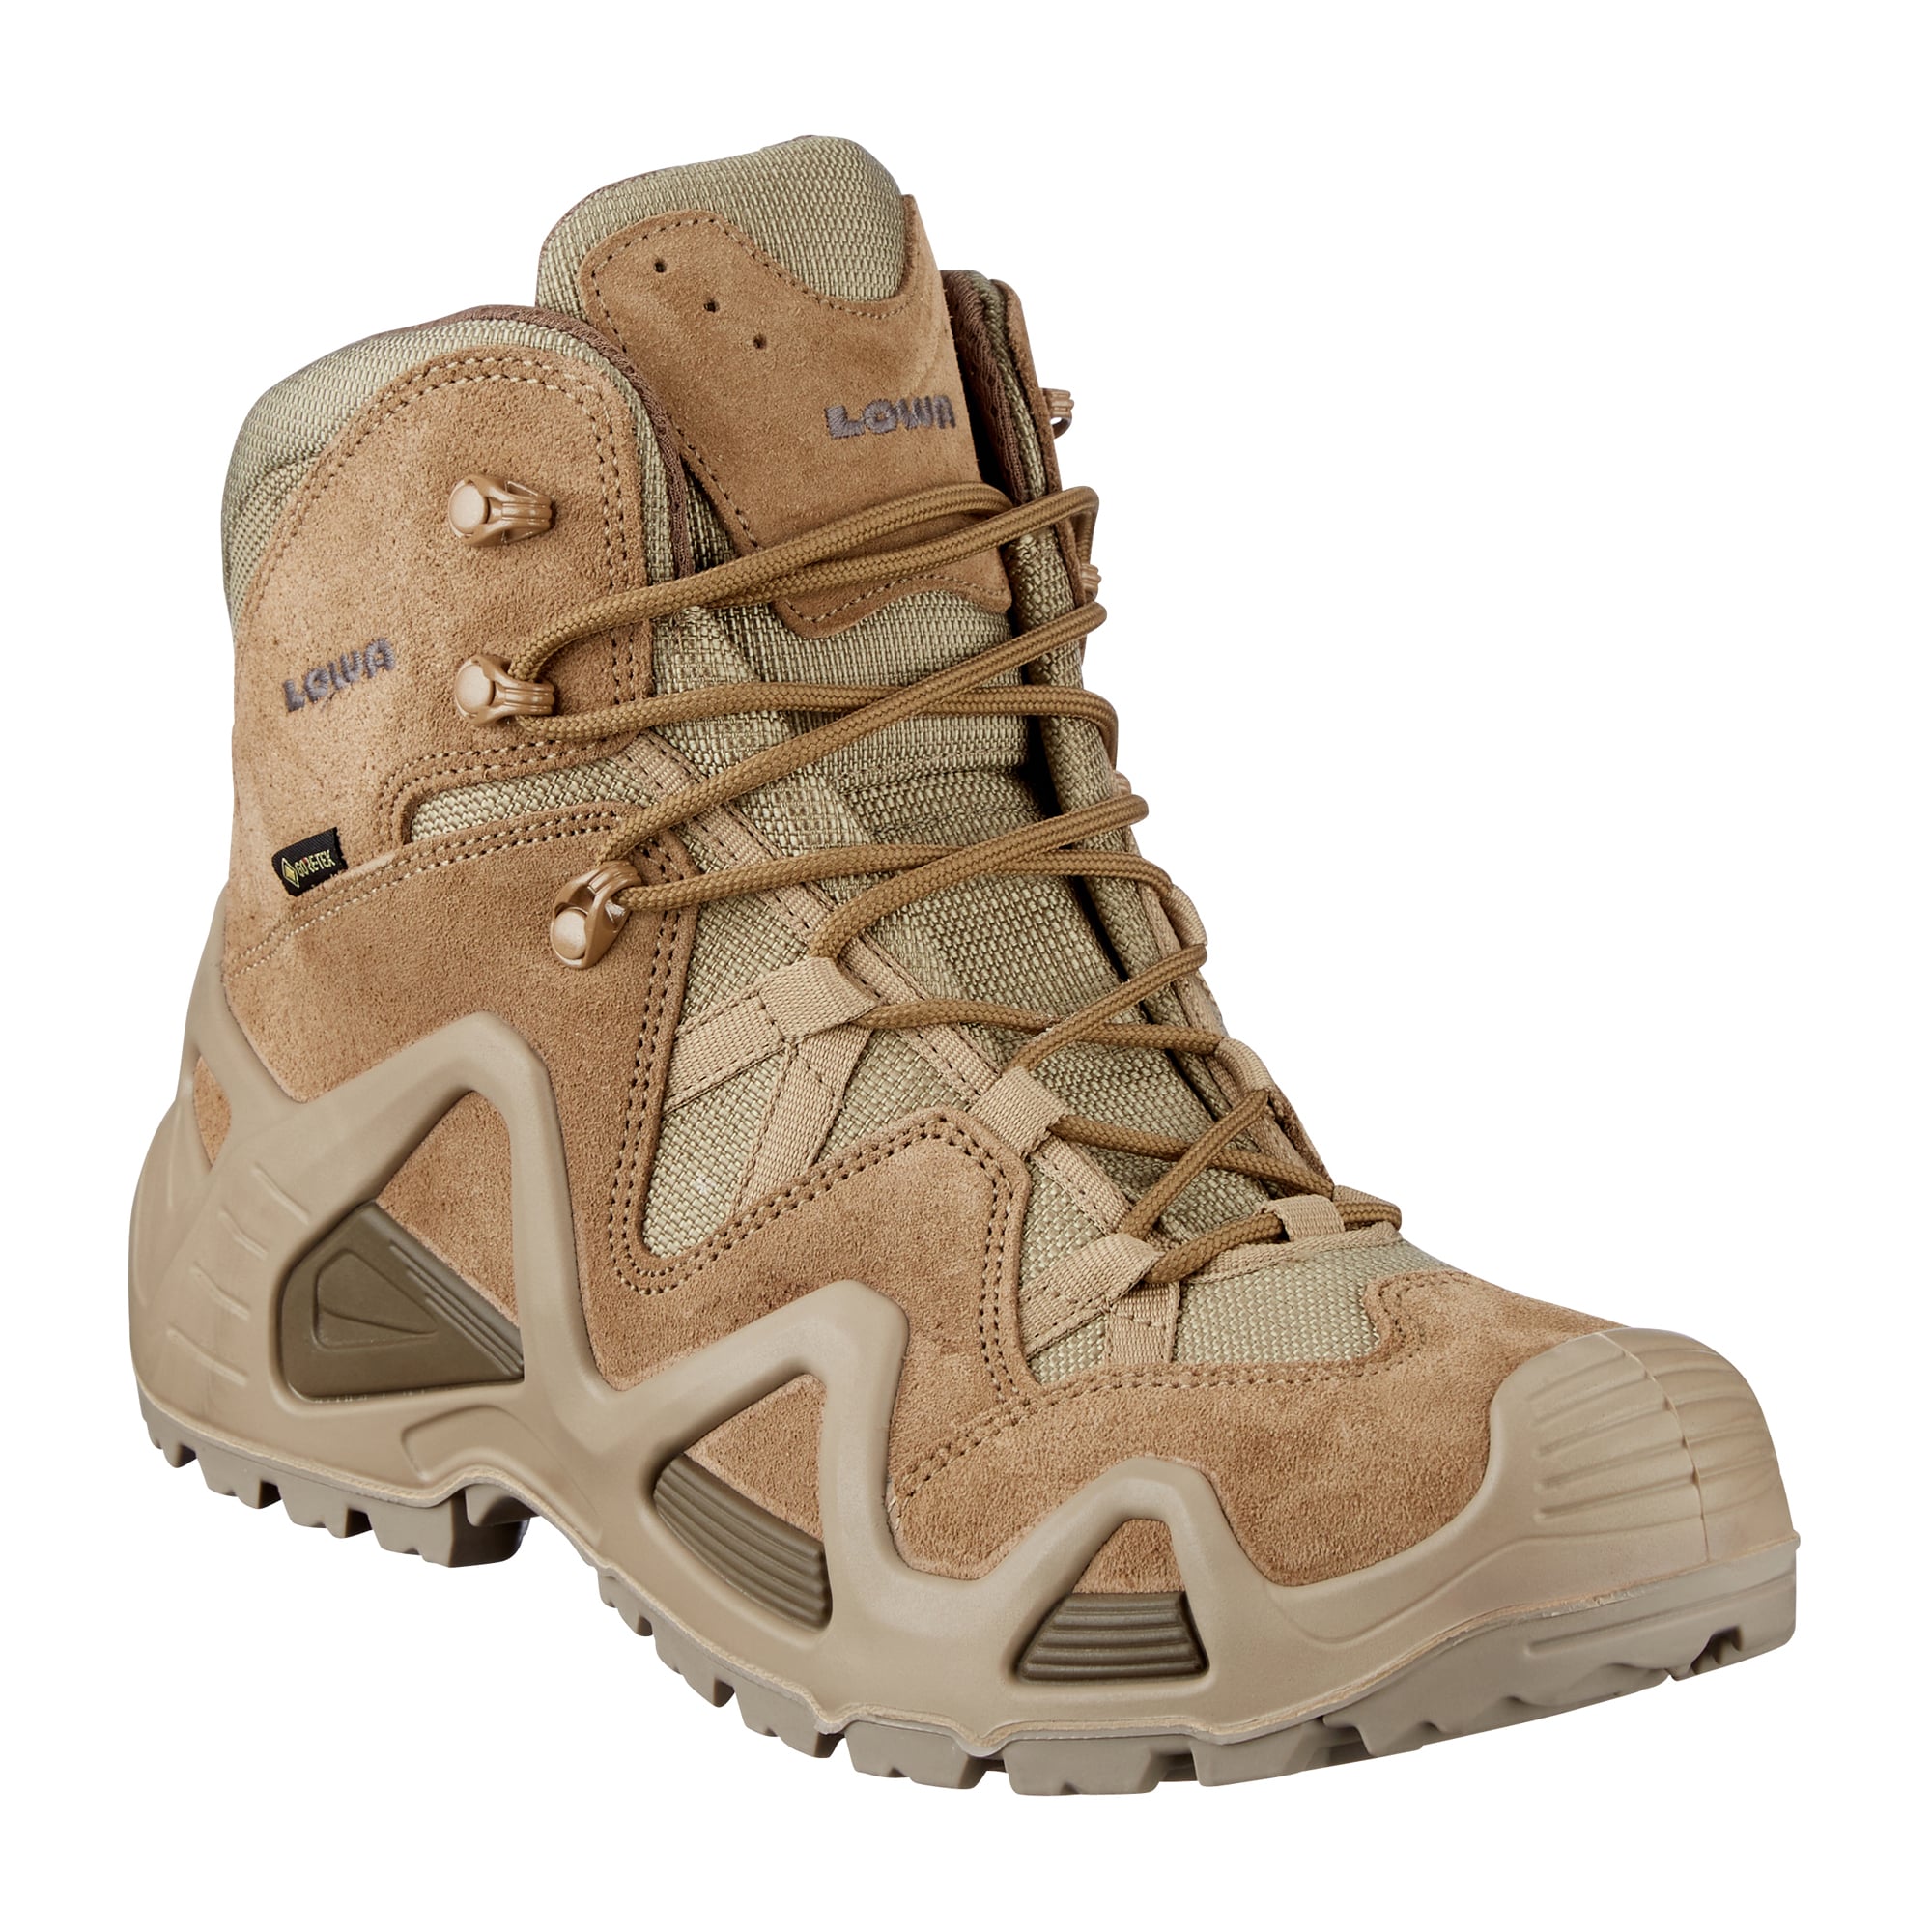 Purchase theLOWA Boots Zephyr GTX Mid TF